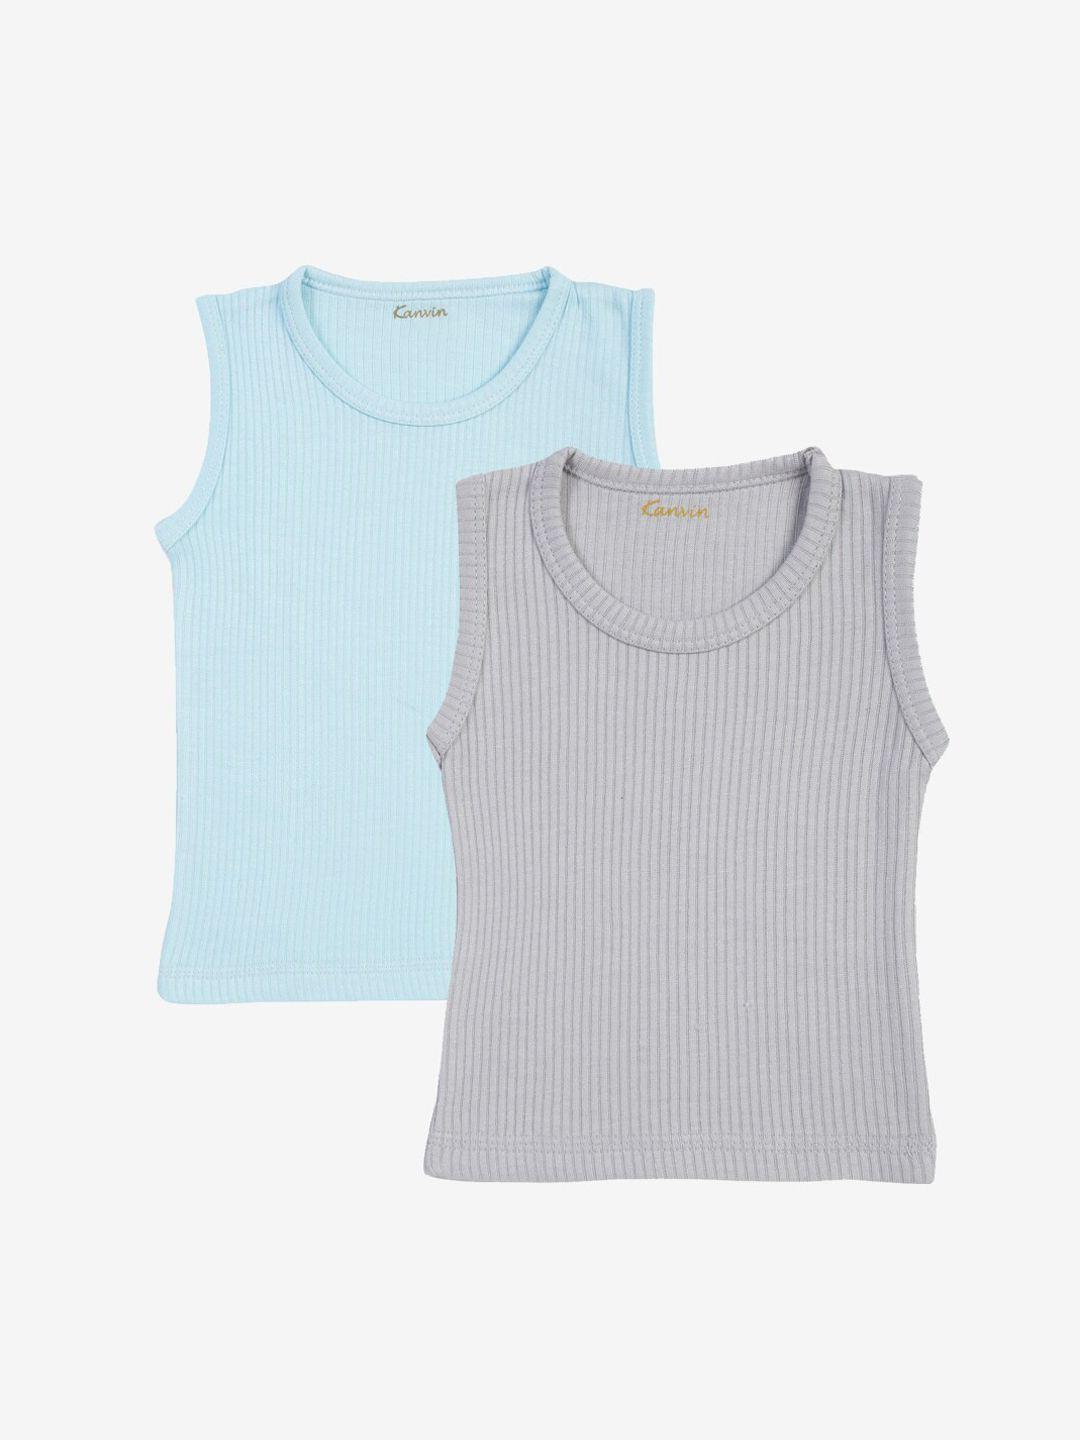 kanvin infant boys turquoise blue and grey pack of 2 solid thermal tops